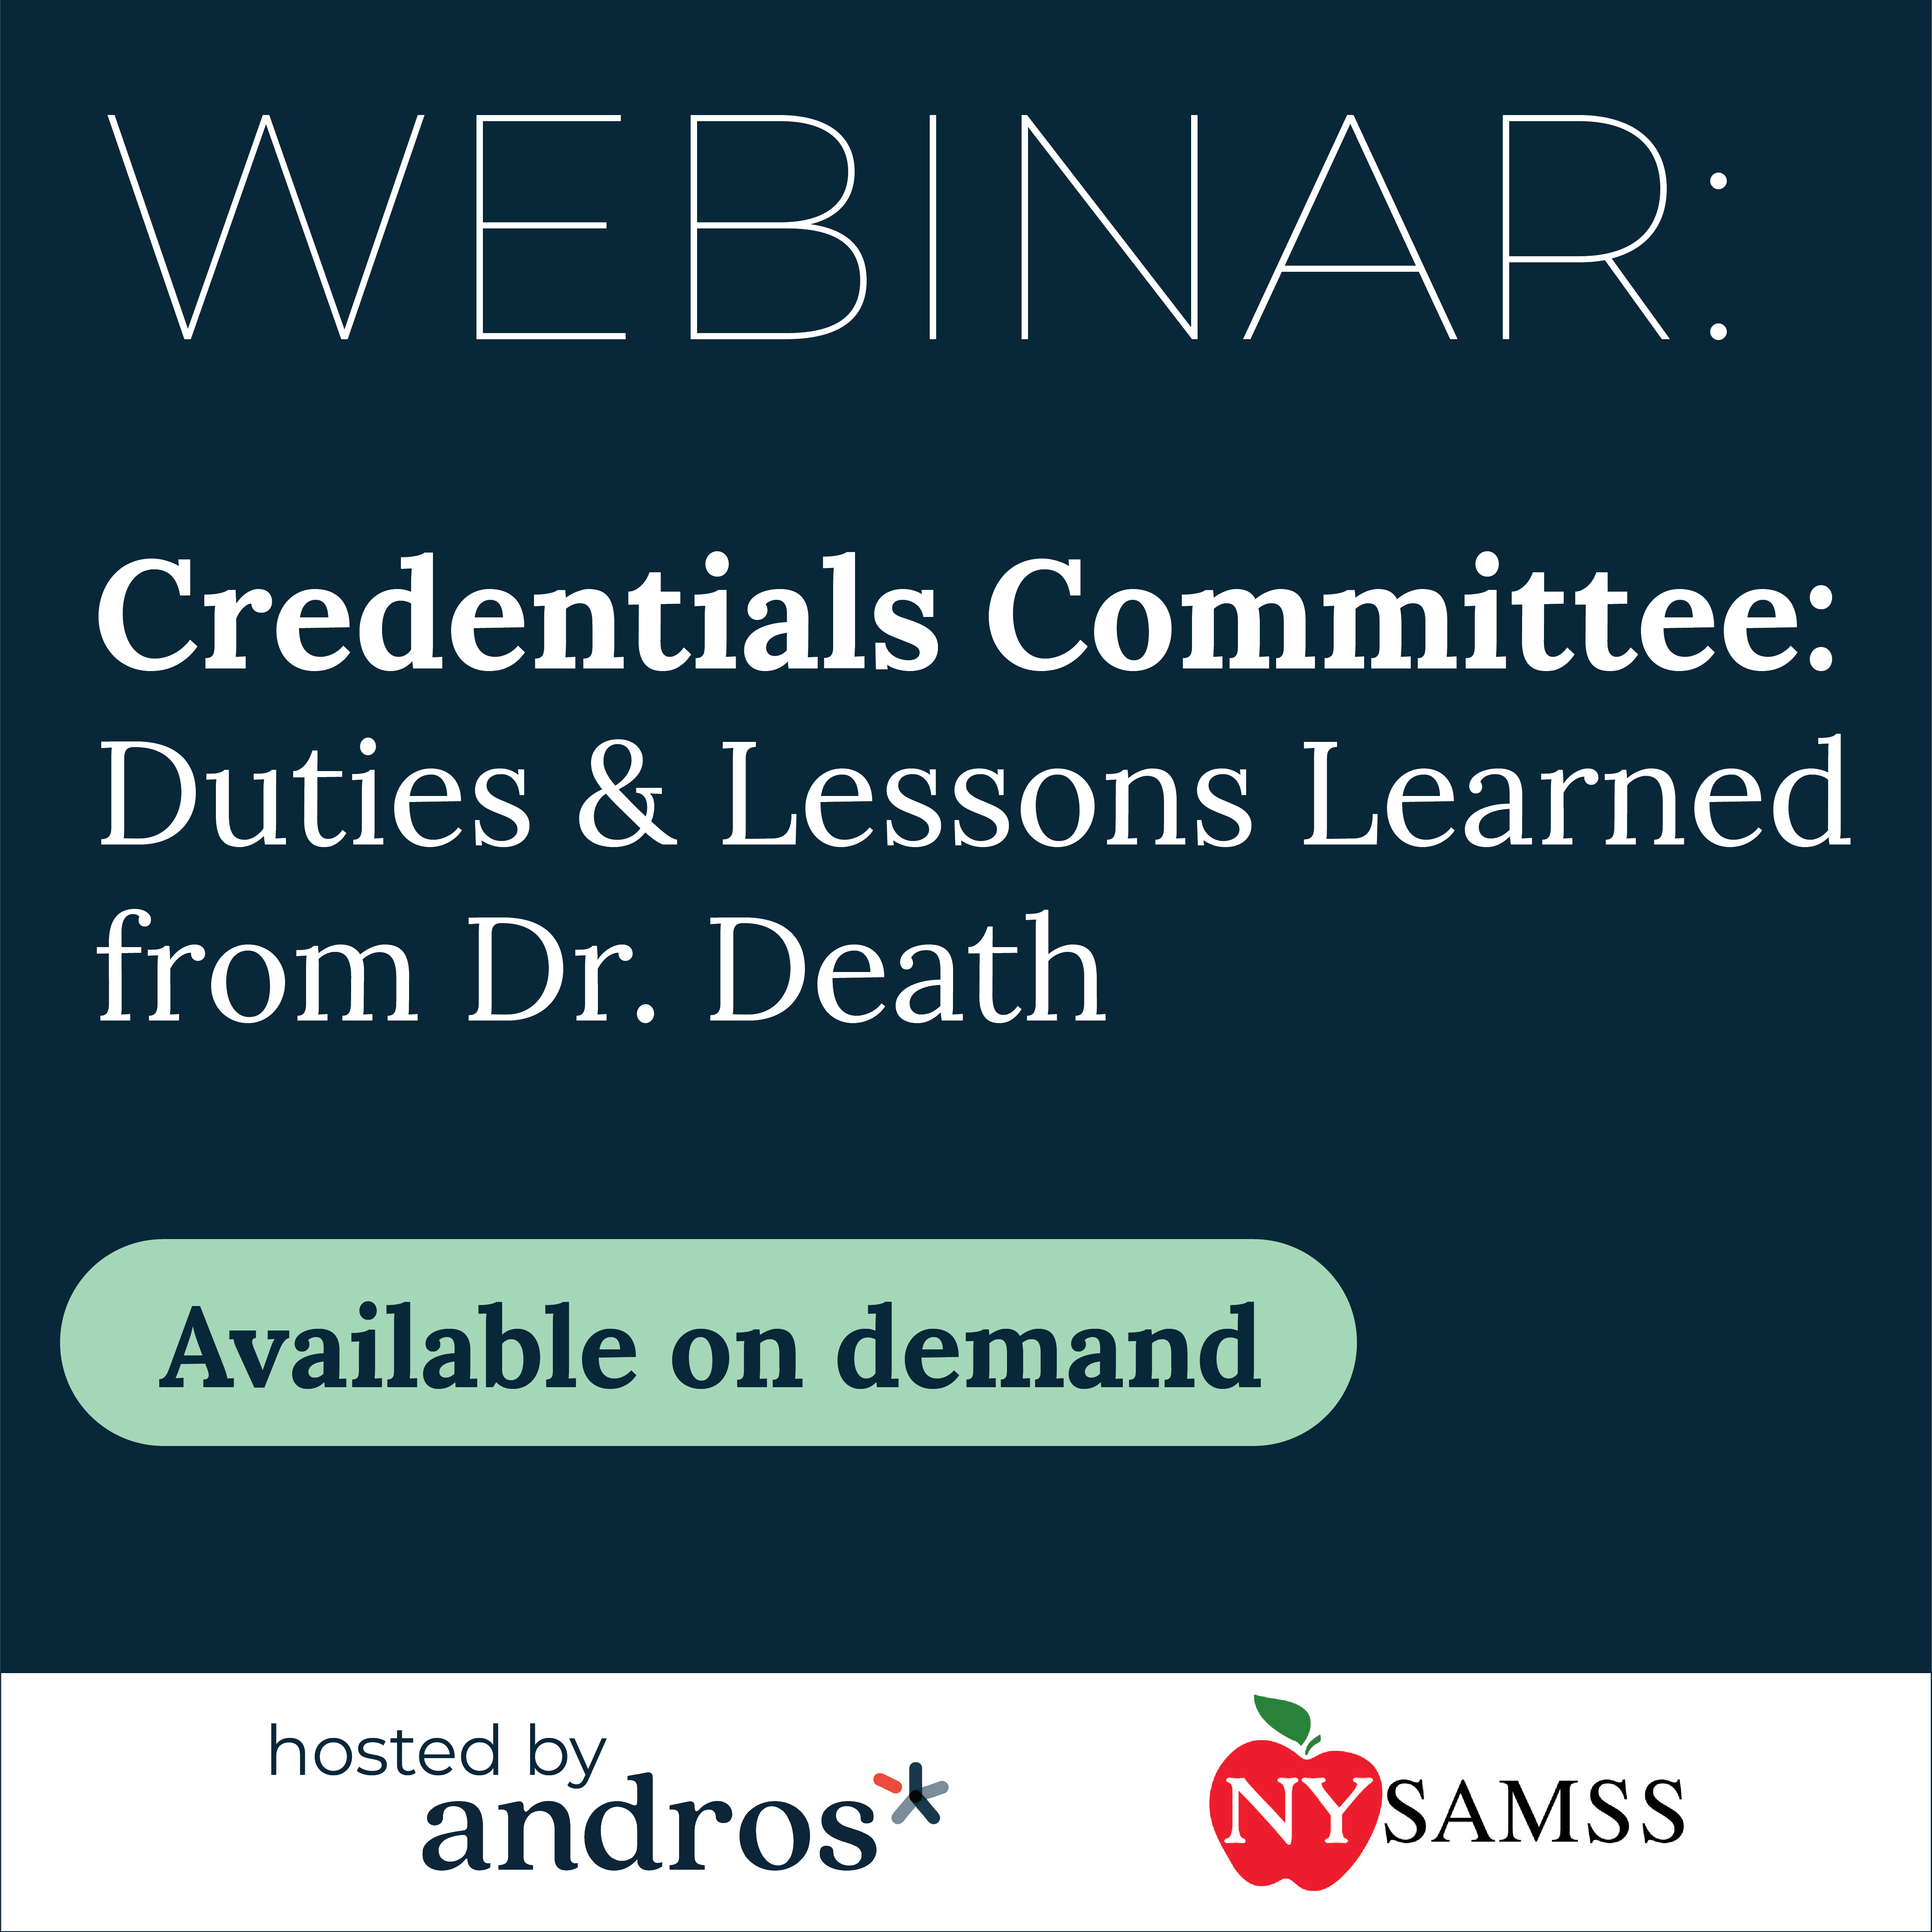 Credentials Committee: Duties & Lessons Learned from Dr. Death